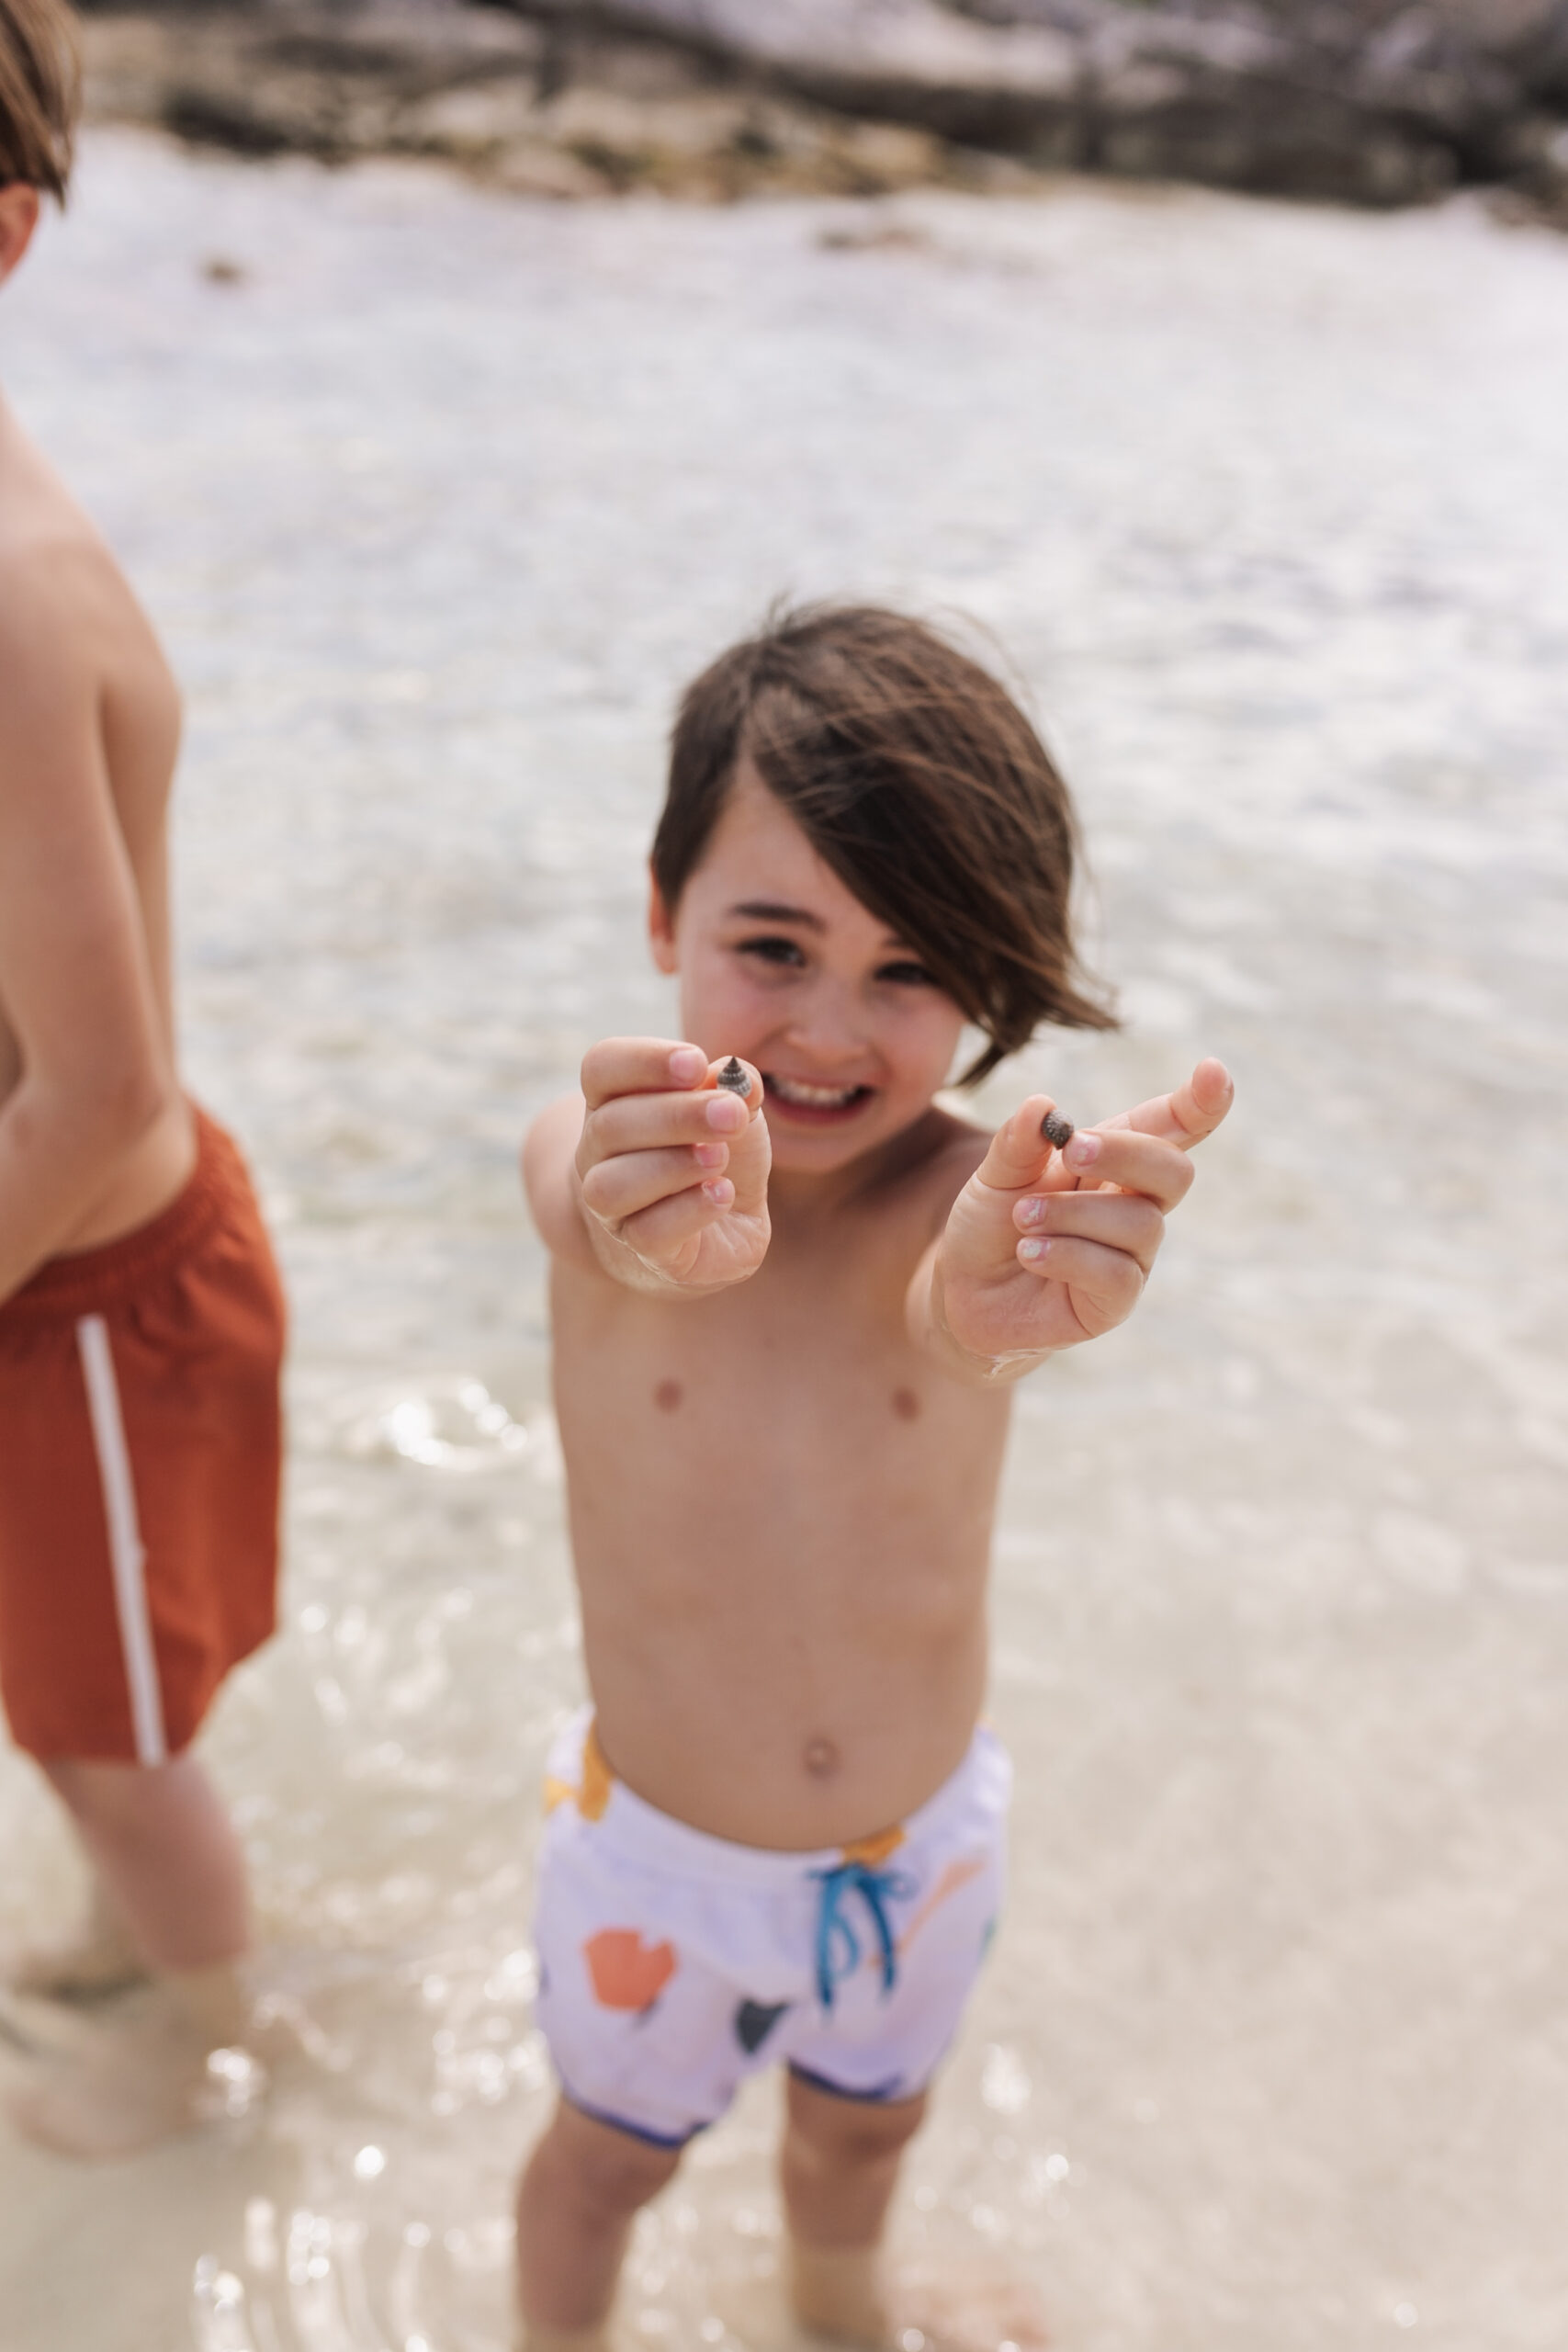 finding seashells during our trip to the riviera maya, mexico #travelwithkids #familytravel #beachtrip #wanderlust